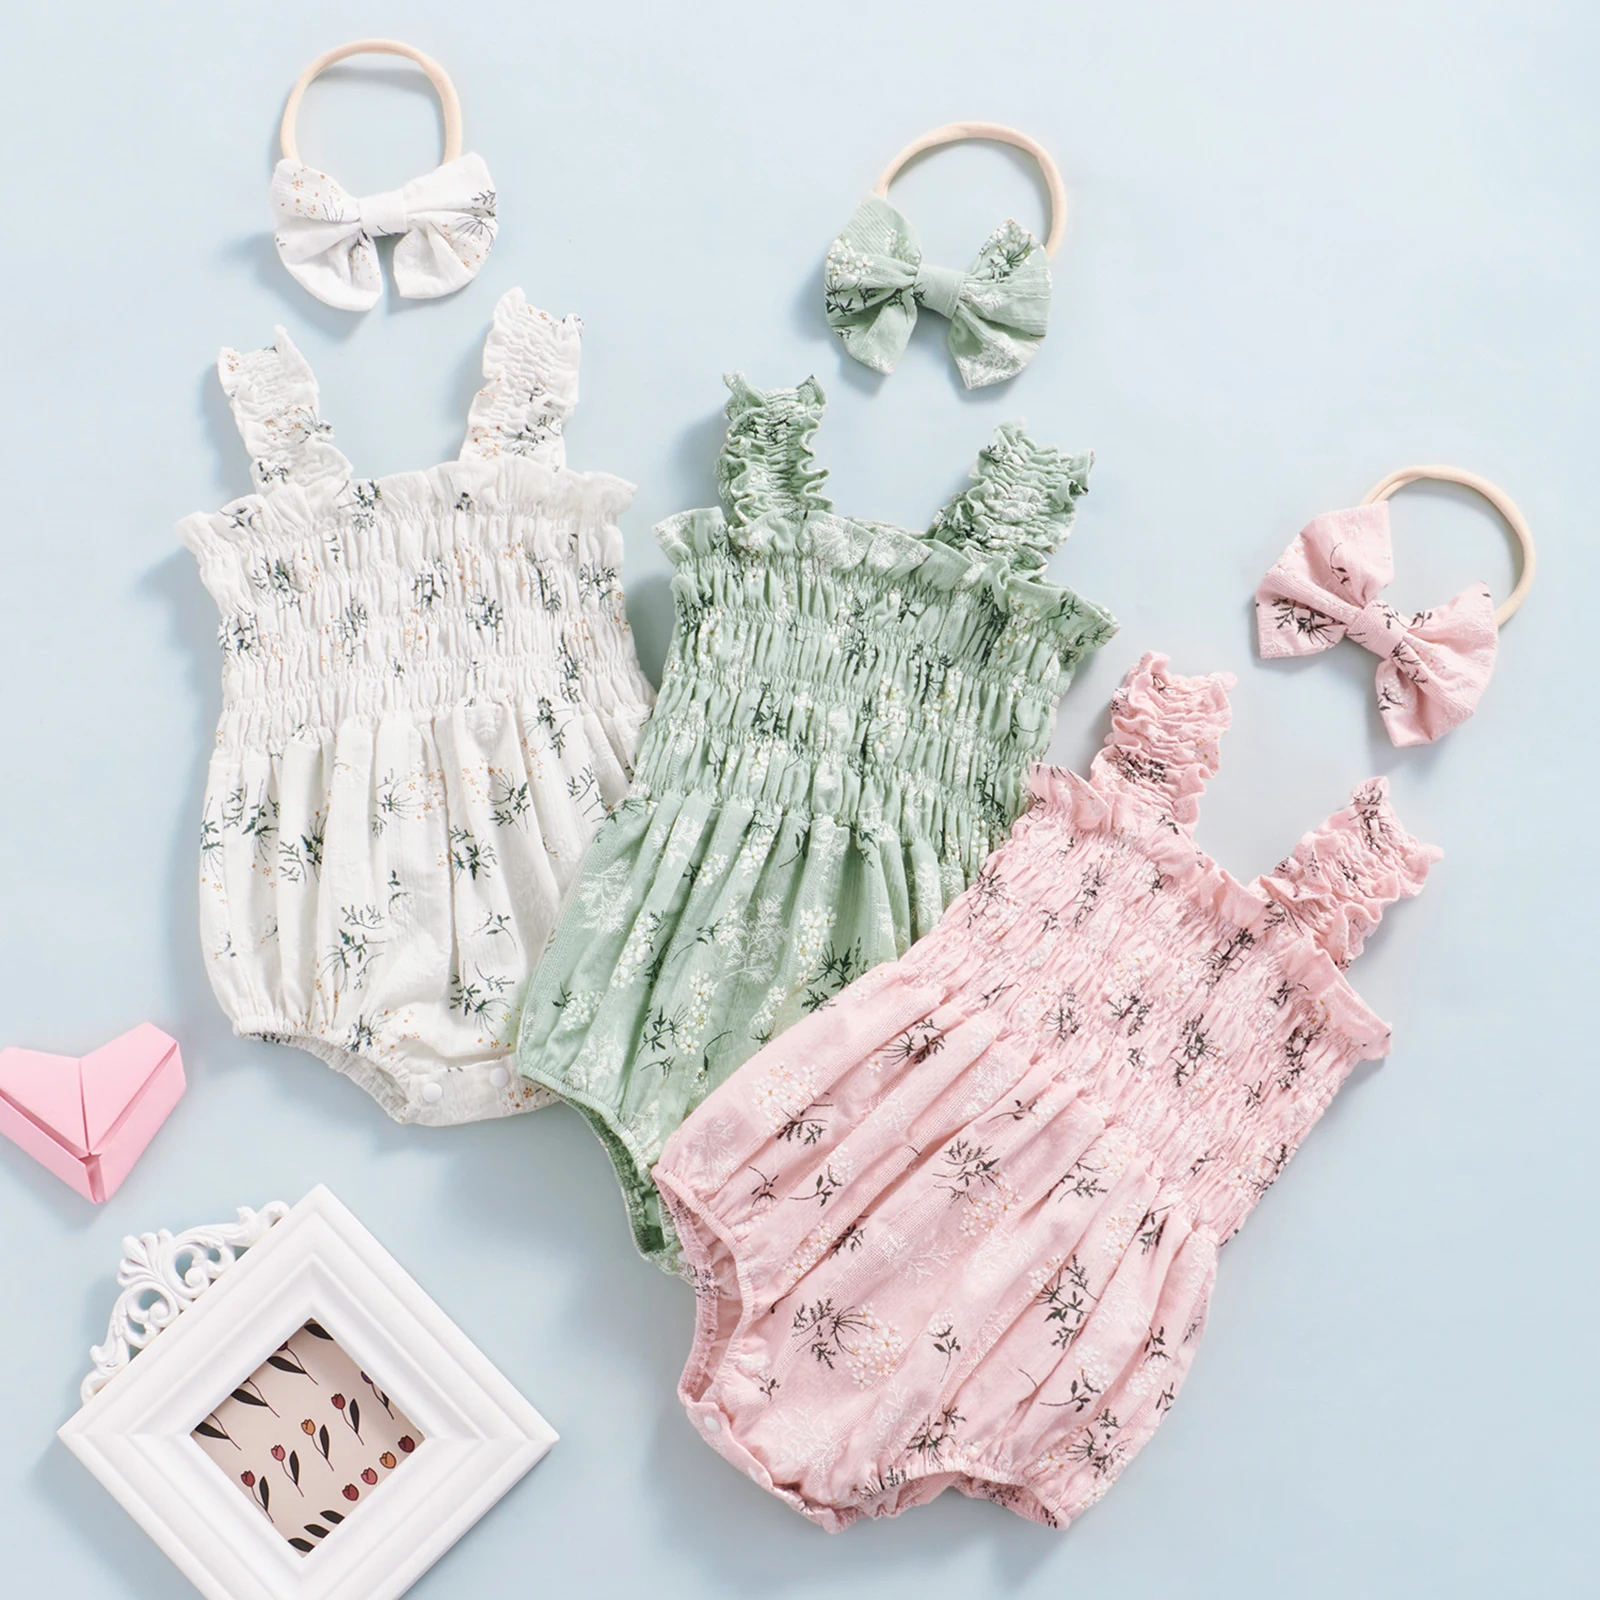 Infant Baby Girl's Sleeveless Jumpsuit Floral Print Elastic Bust Shoulder Straps Romper Bow Headband cool baby bodysuits	